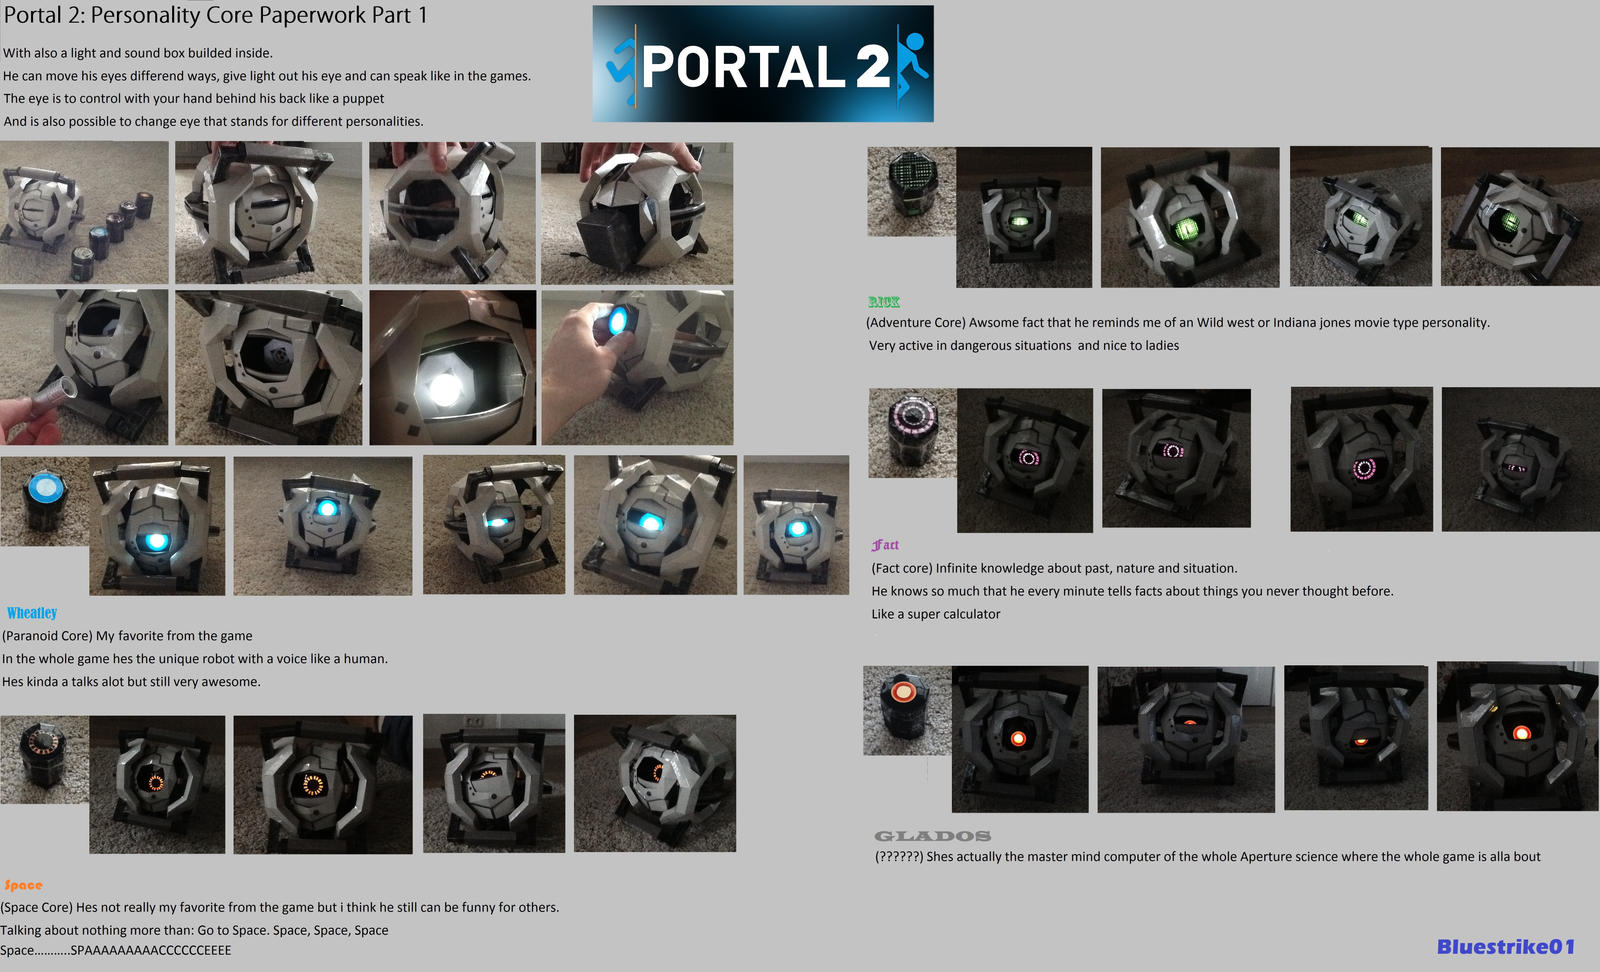 Space core from portal 2 фото 69